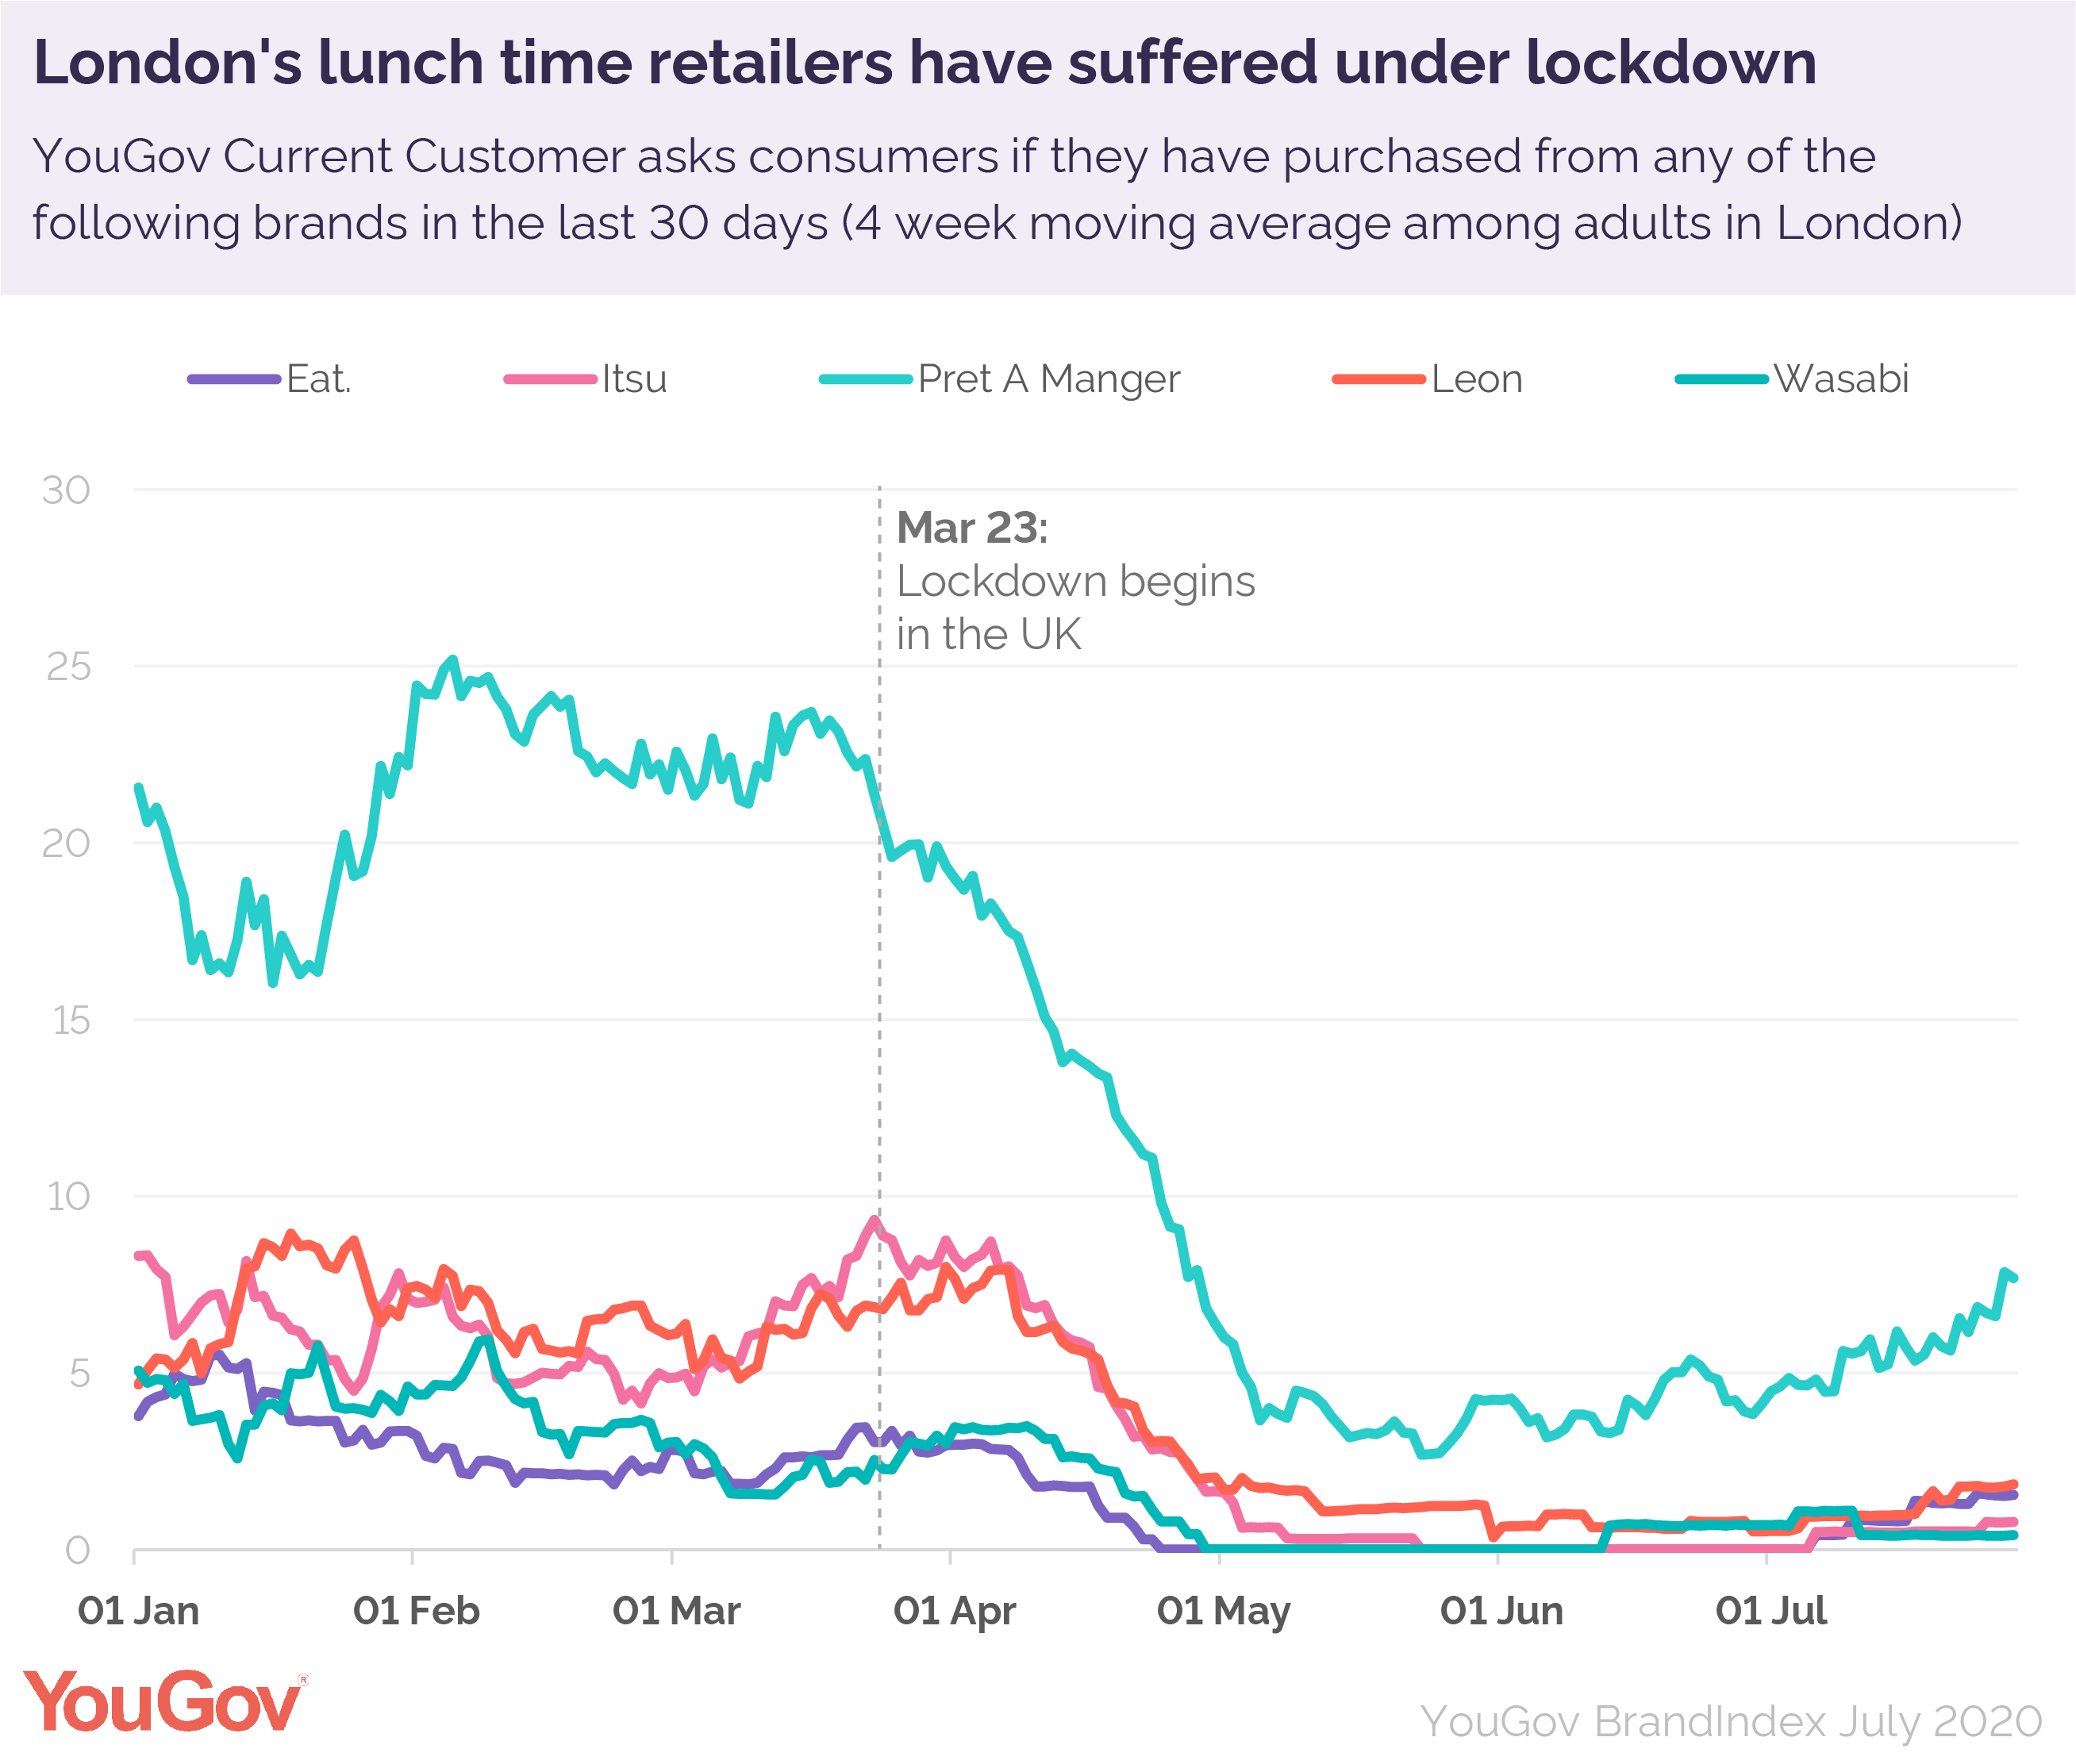 London’s lunch retailers are suffering, but are not forgotten